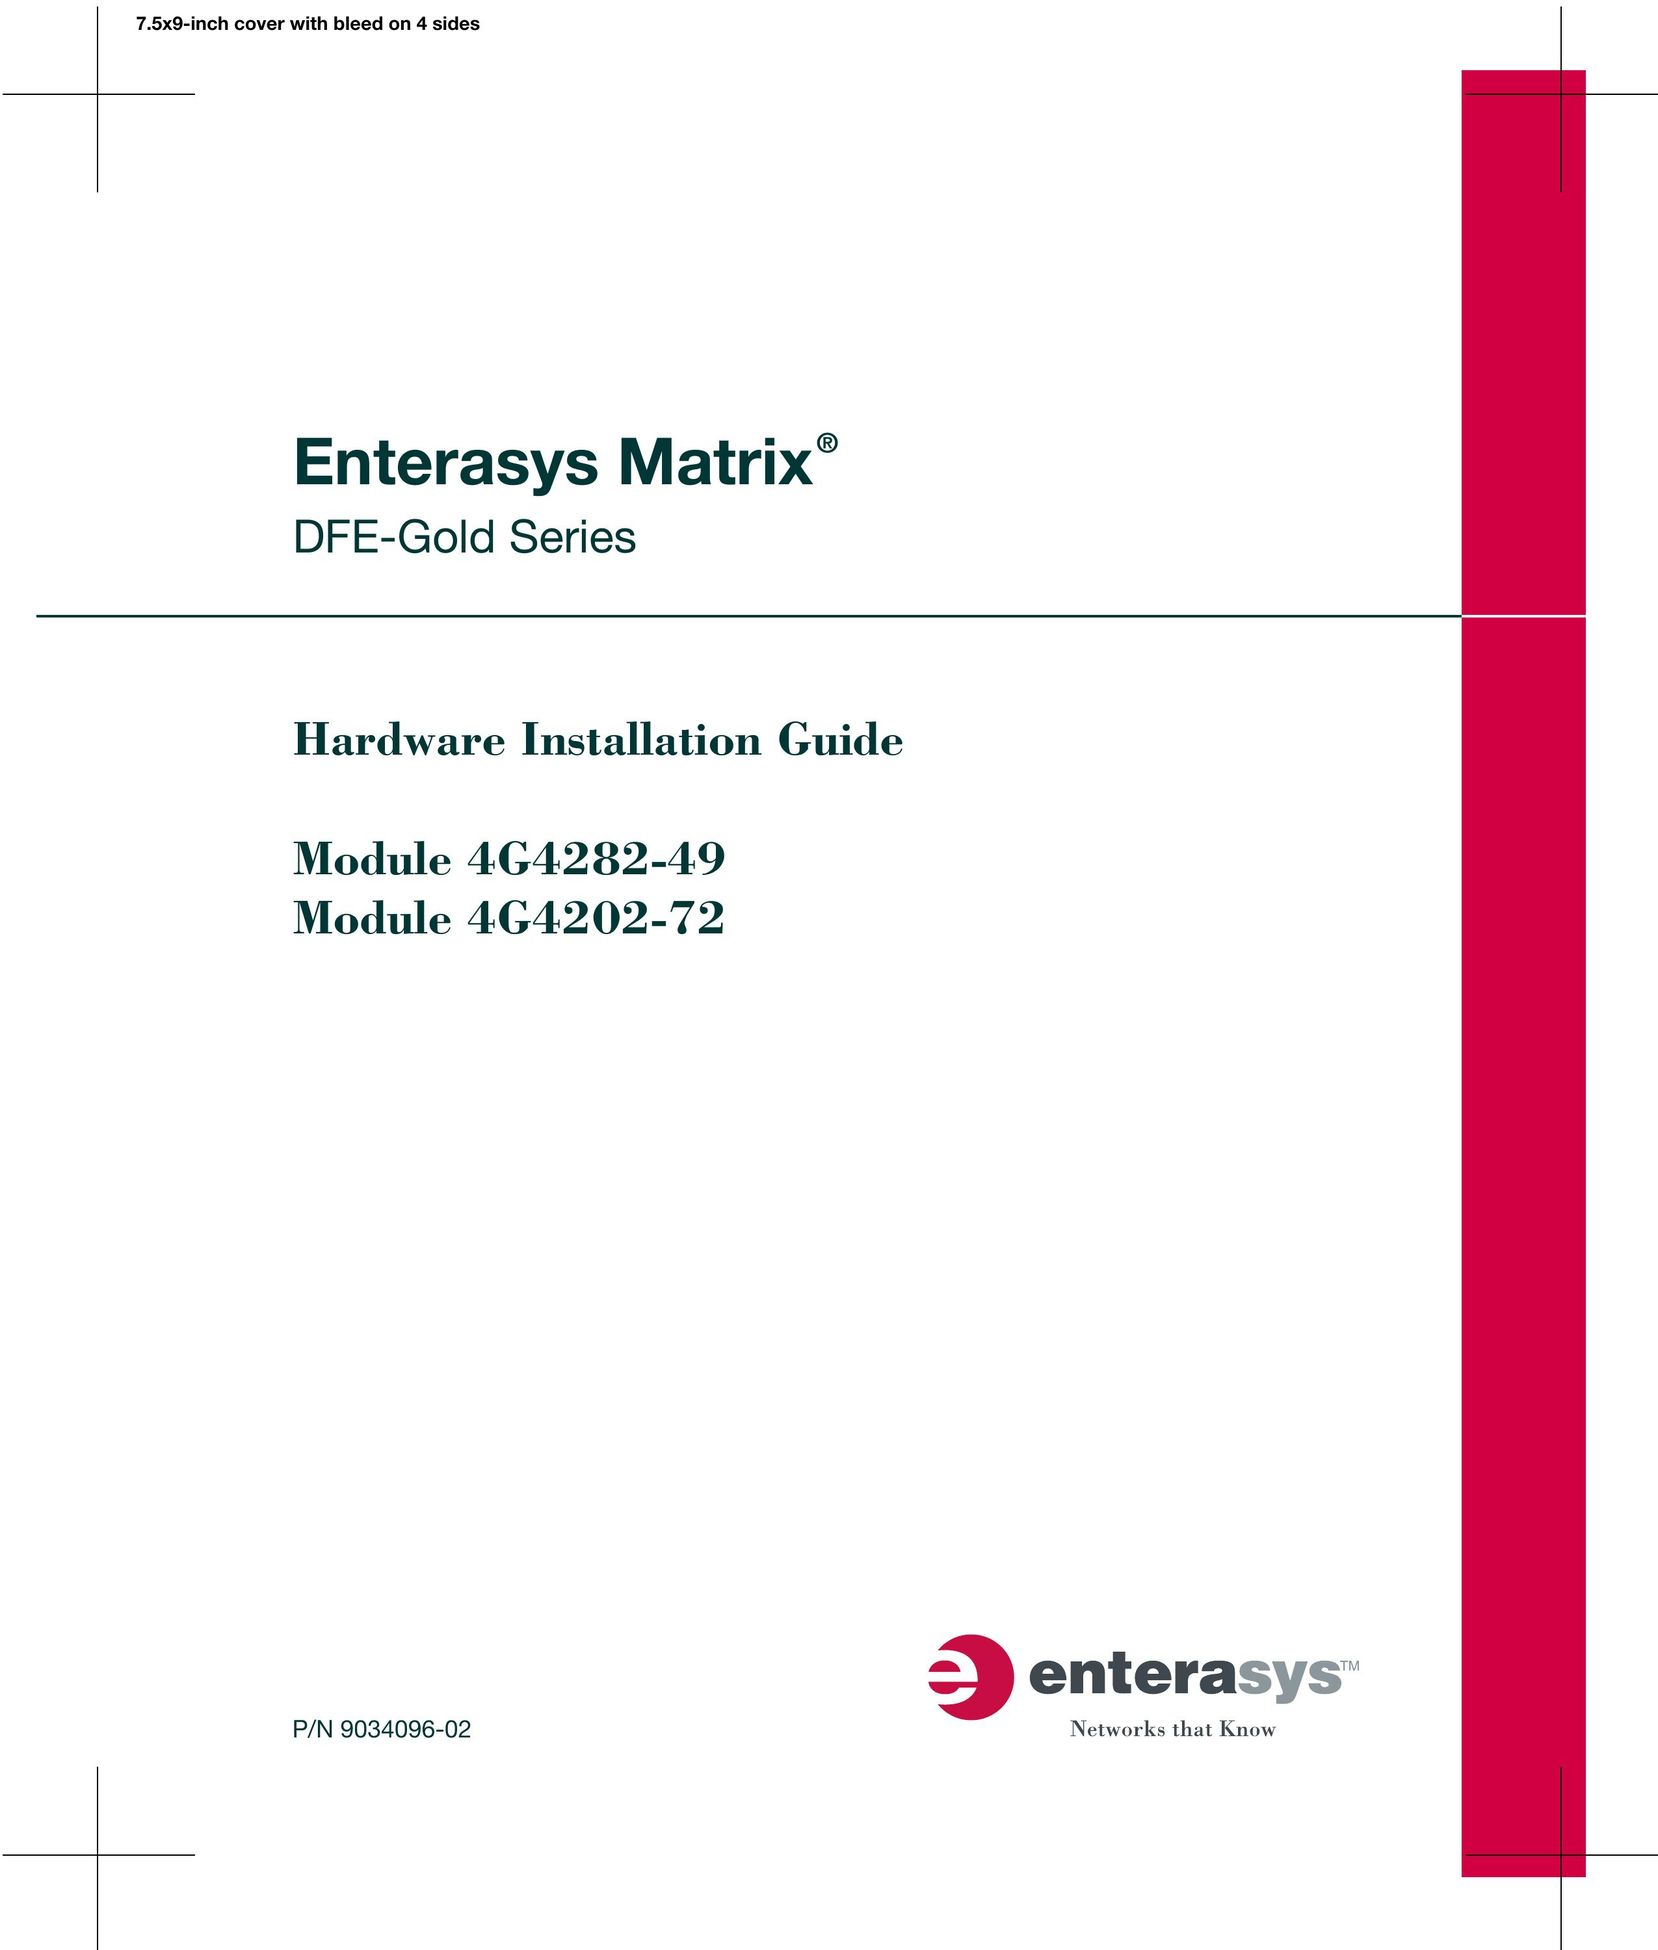 Enterasys Networks 6H303-48 Switch User Manual